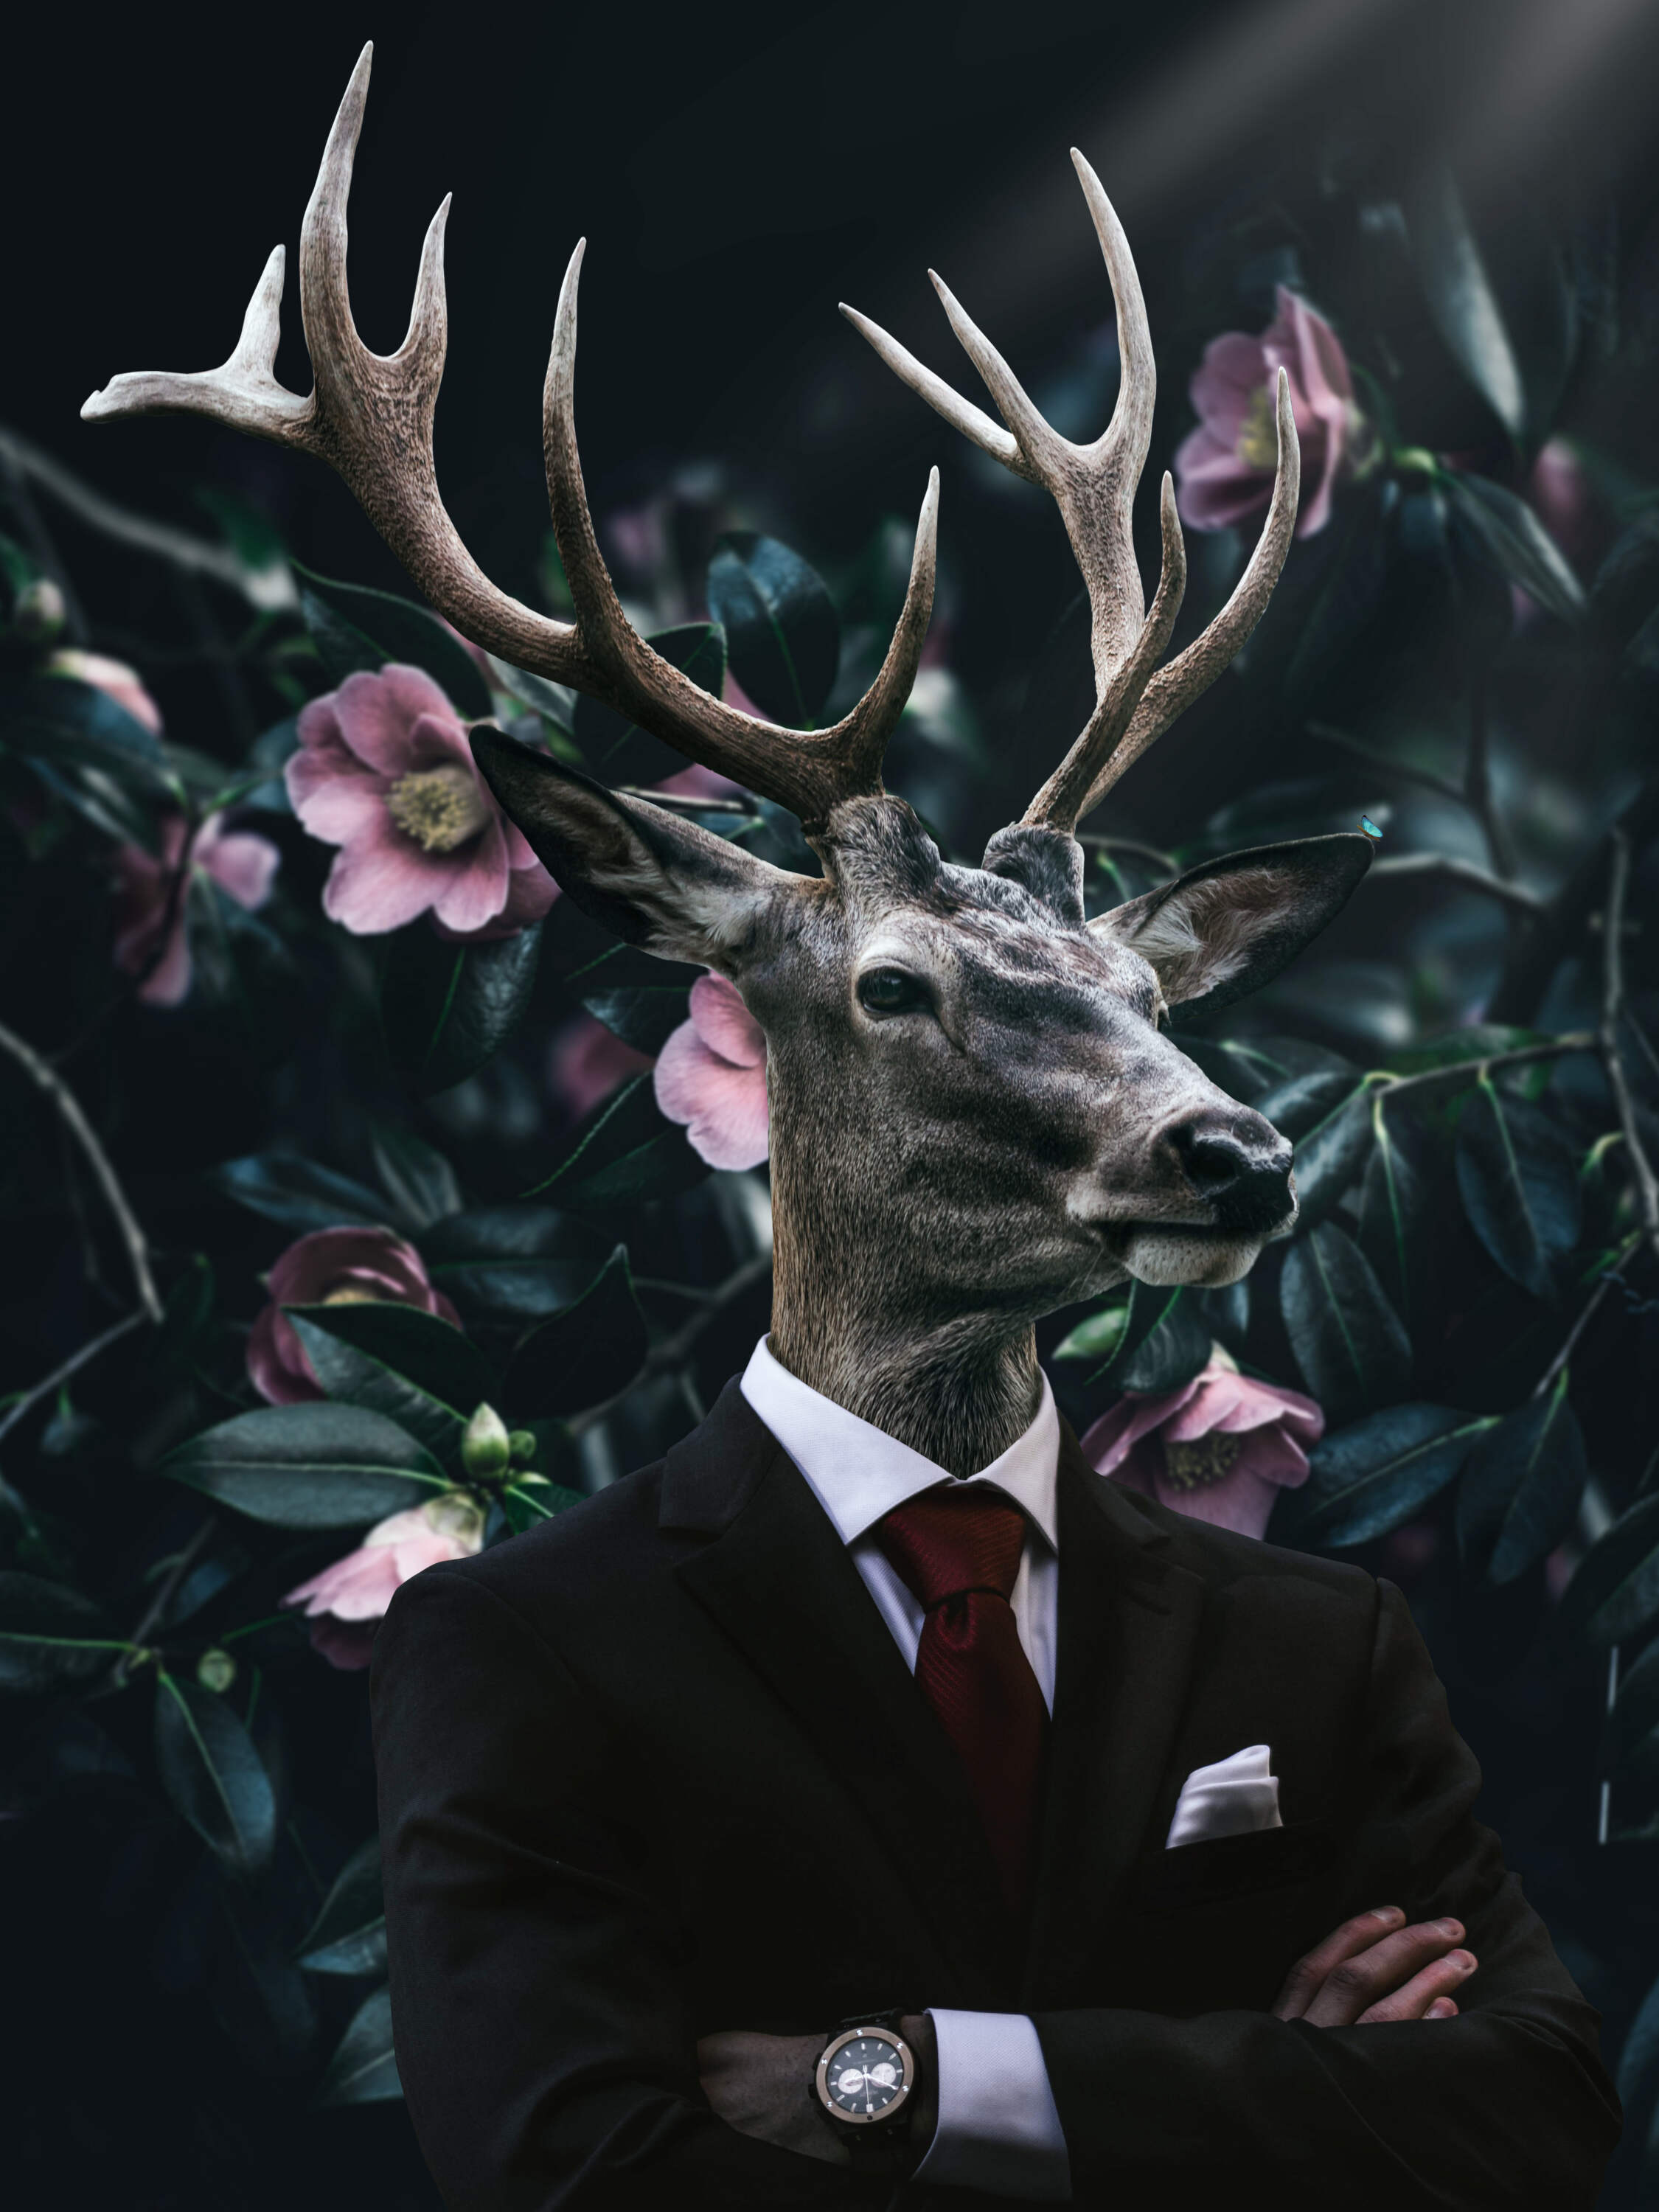 Create a Surreal Portrait of an animal in a human suit Photomanipulation